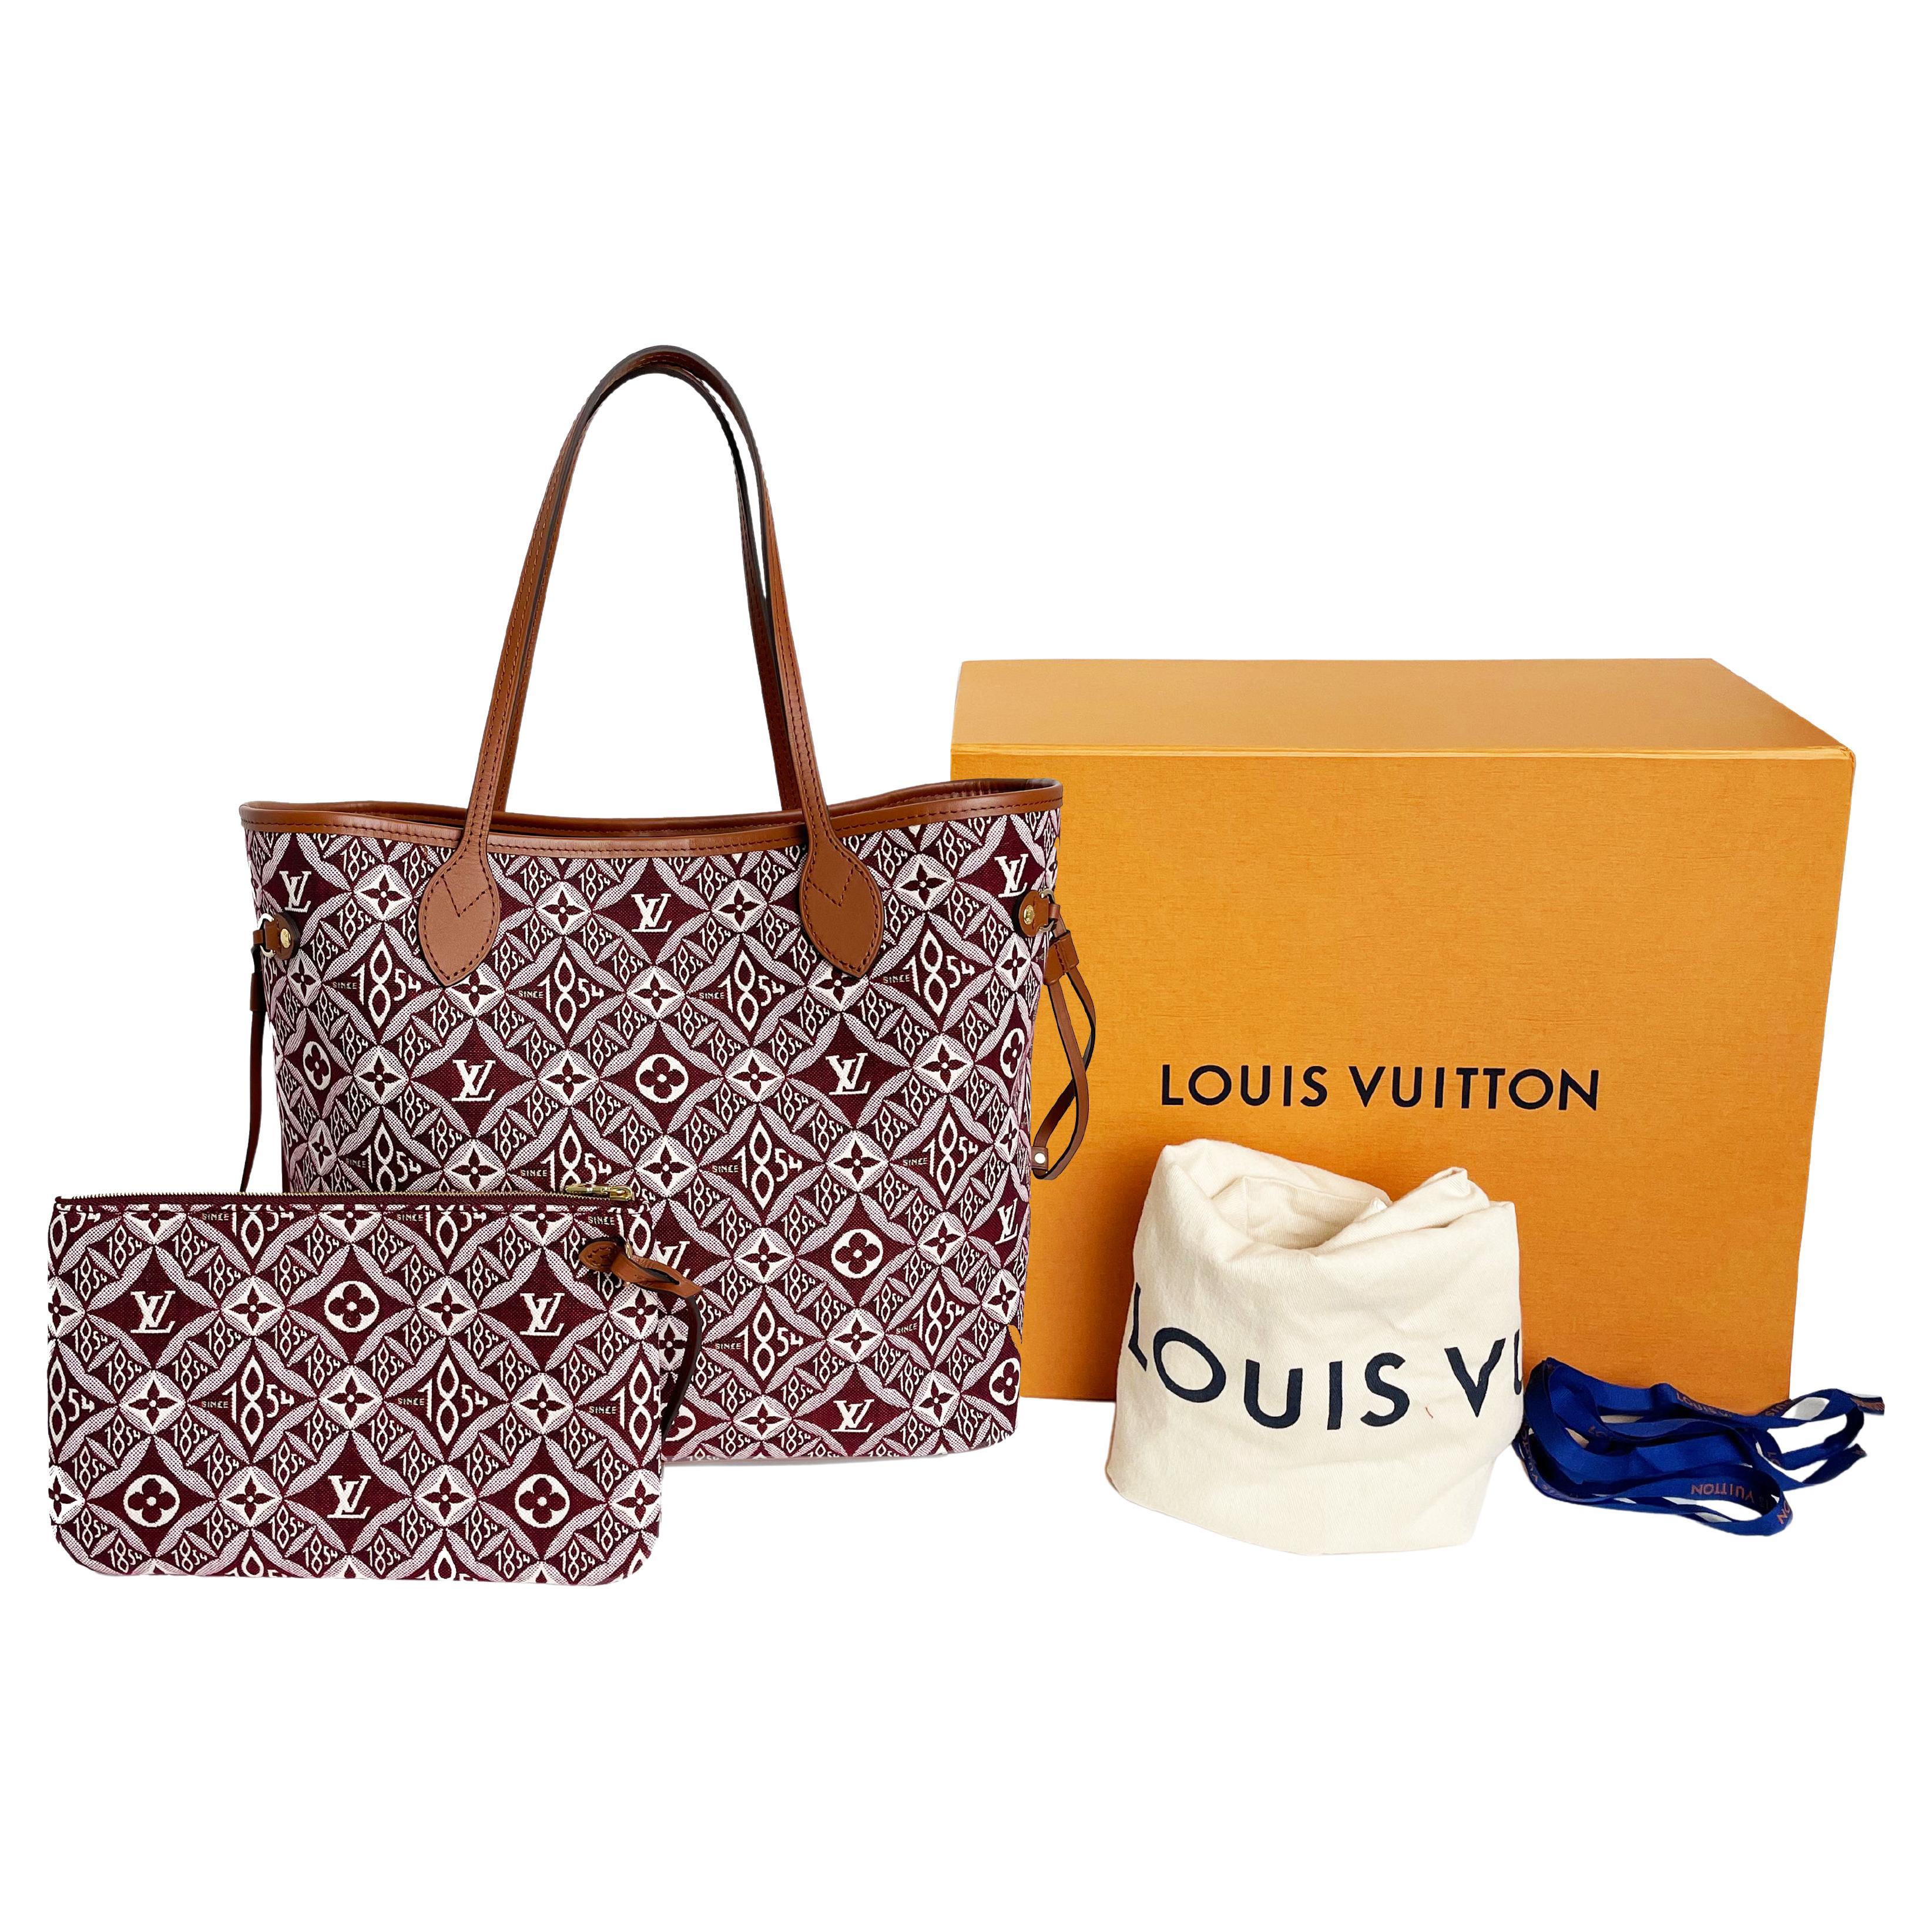 Louis Vuitton 1854 Collection 2020 - For Sale on 1stDibs